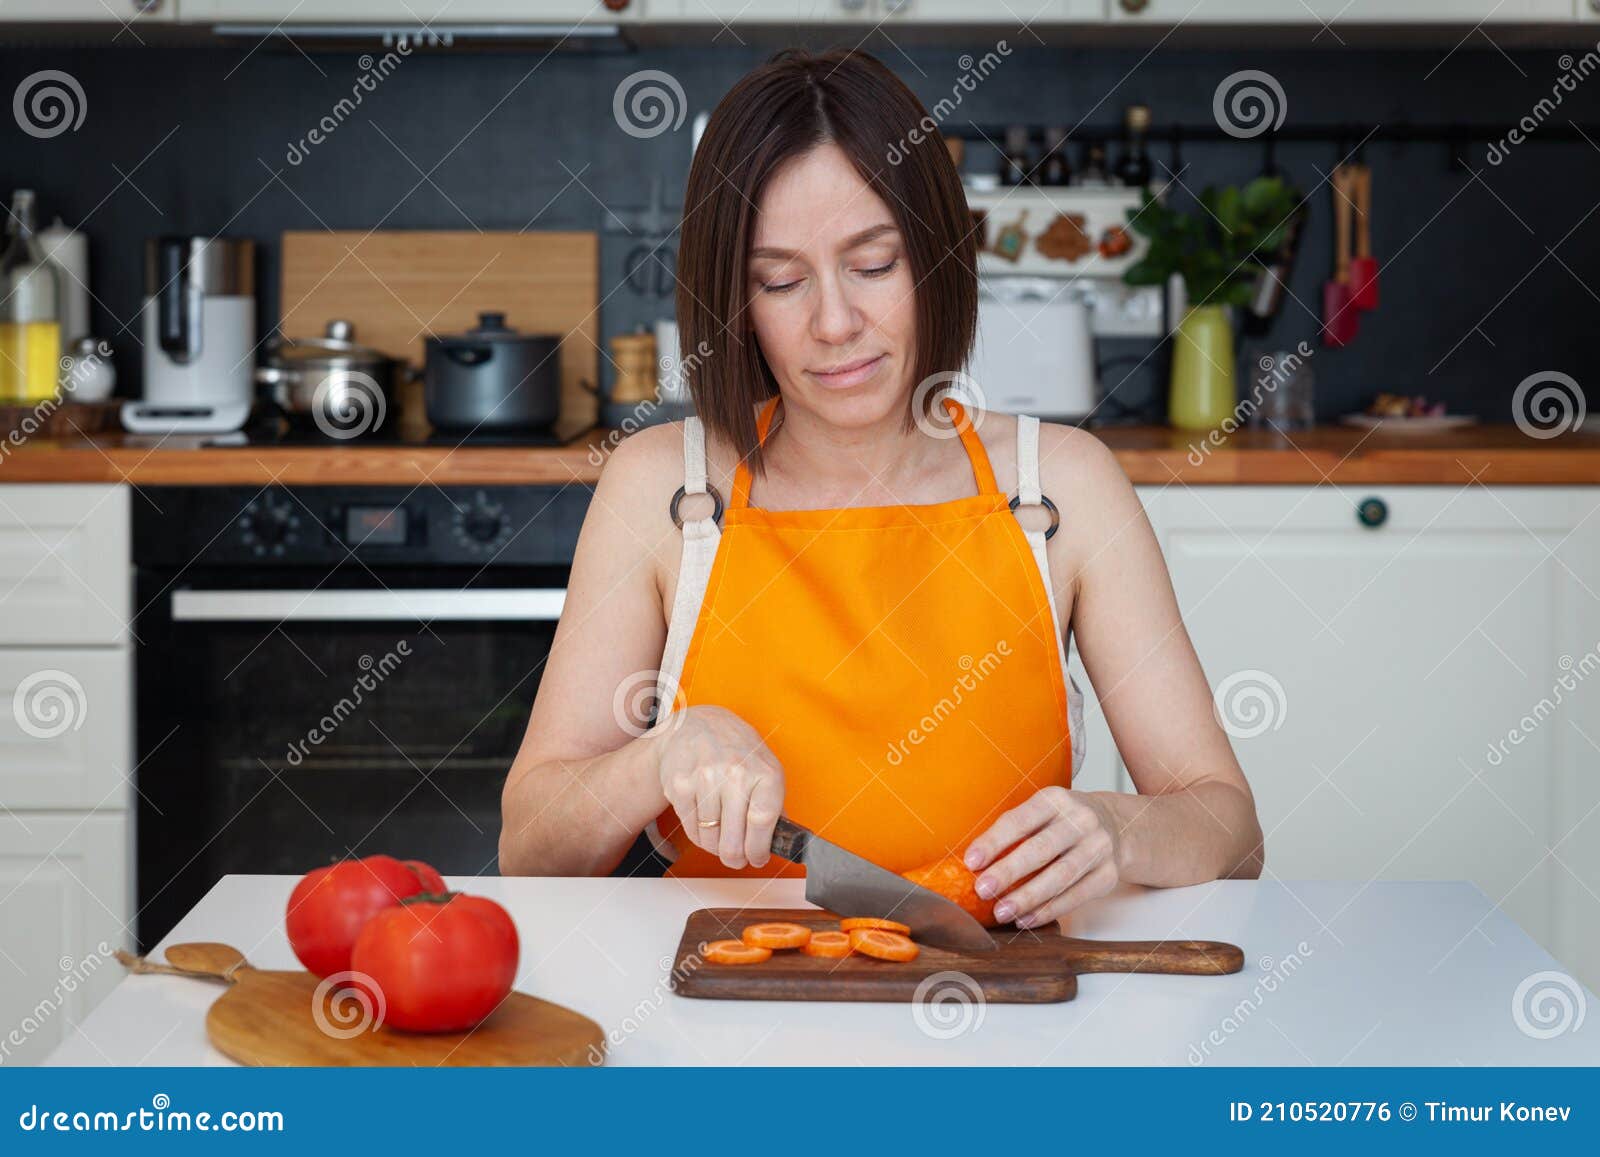 Young Beautiful Woman In Apron Sitting At Table Cooking At Home 